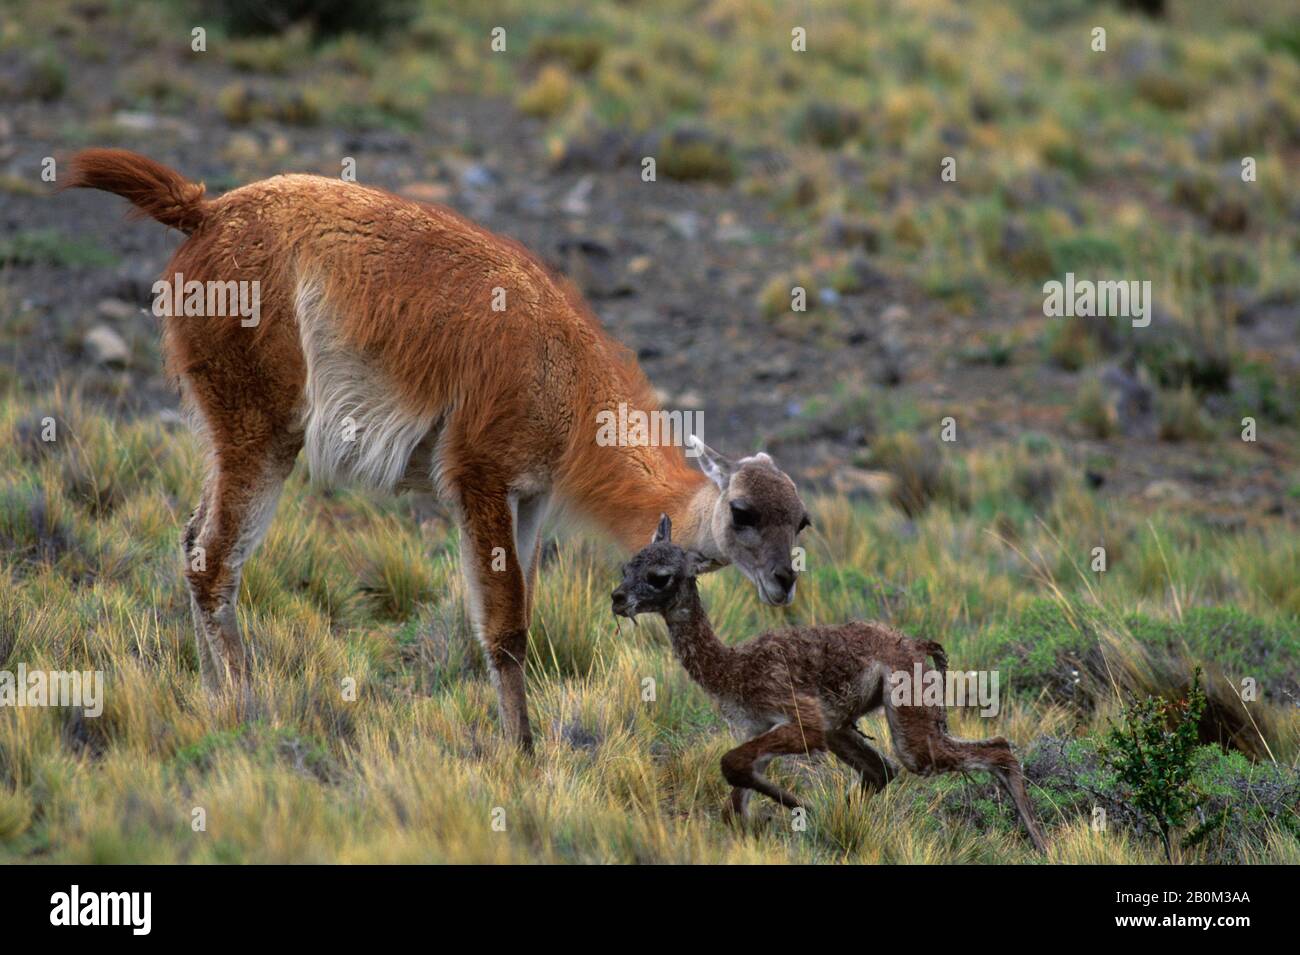 CHILE, TORRES DEL PAINE NAT'L PARK, GUANACOS, MOTHER W/NEWBORN, FIRST STEPS 30 MIN. AFTER BIRTH Stock Photo